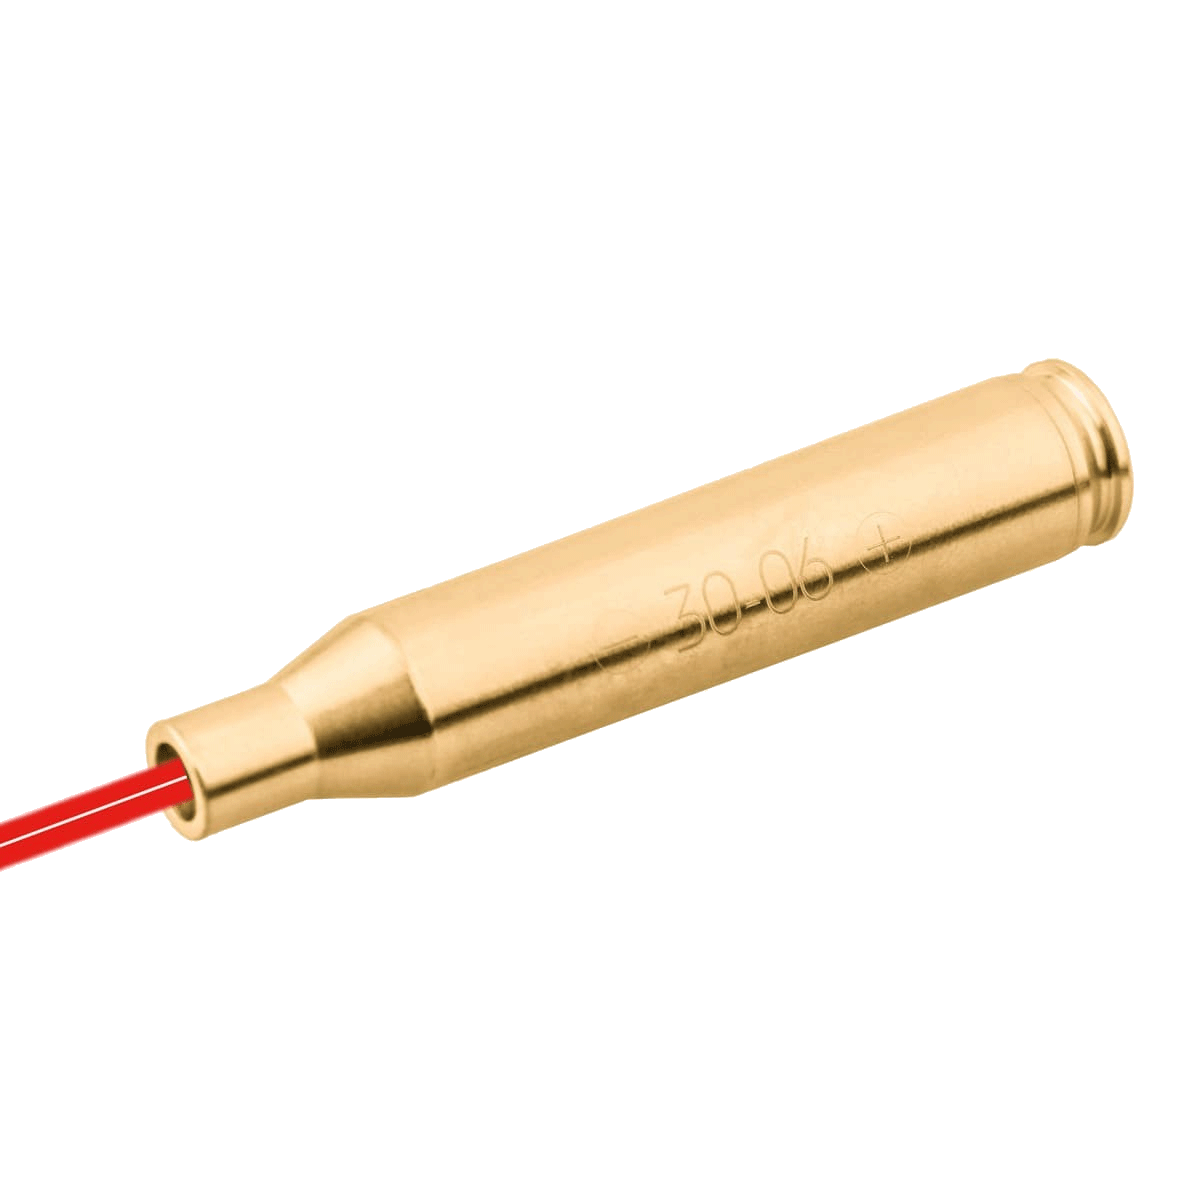 30-06 Cartridge Red Laser Bore Sight